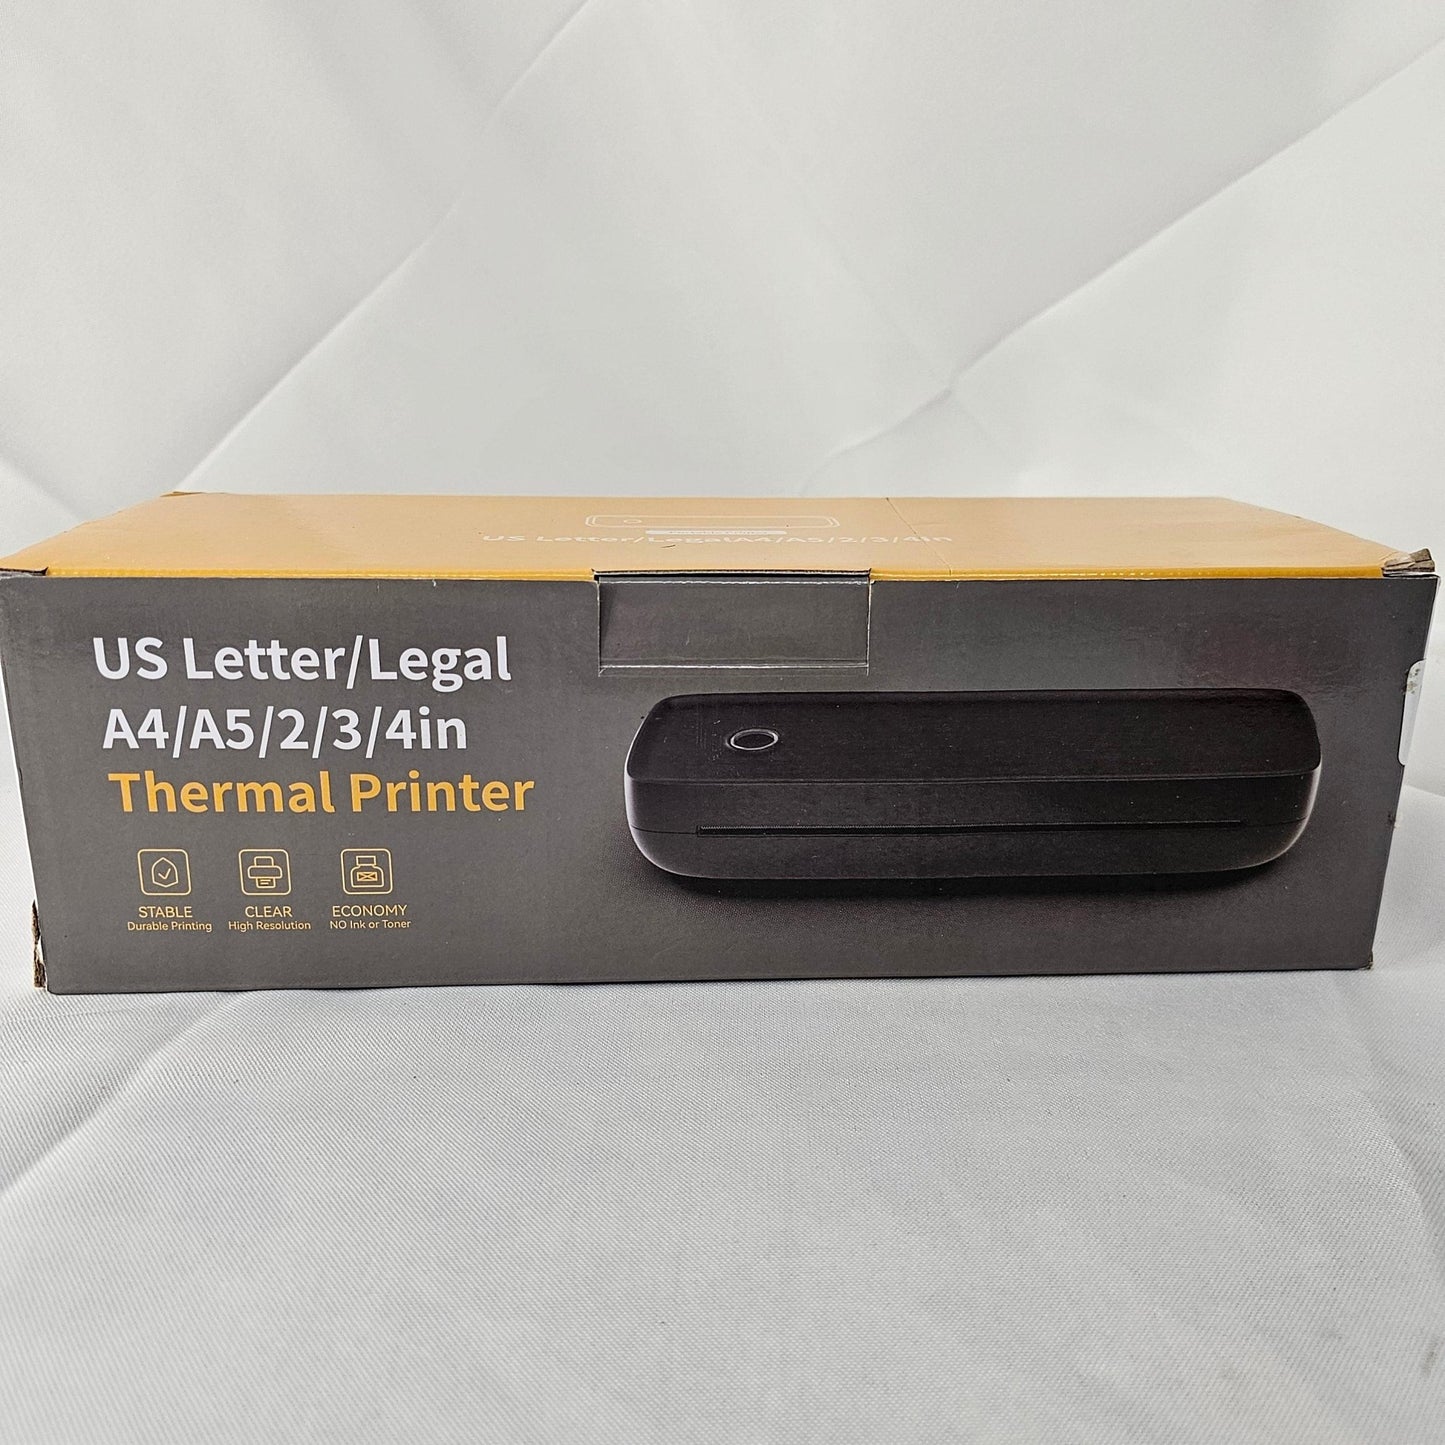 US Letter Legal A4 A5 2 3 4 in Thermal Printer Portable A80 - DQ Distribution